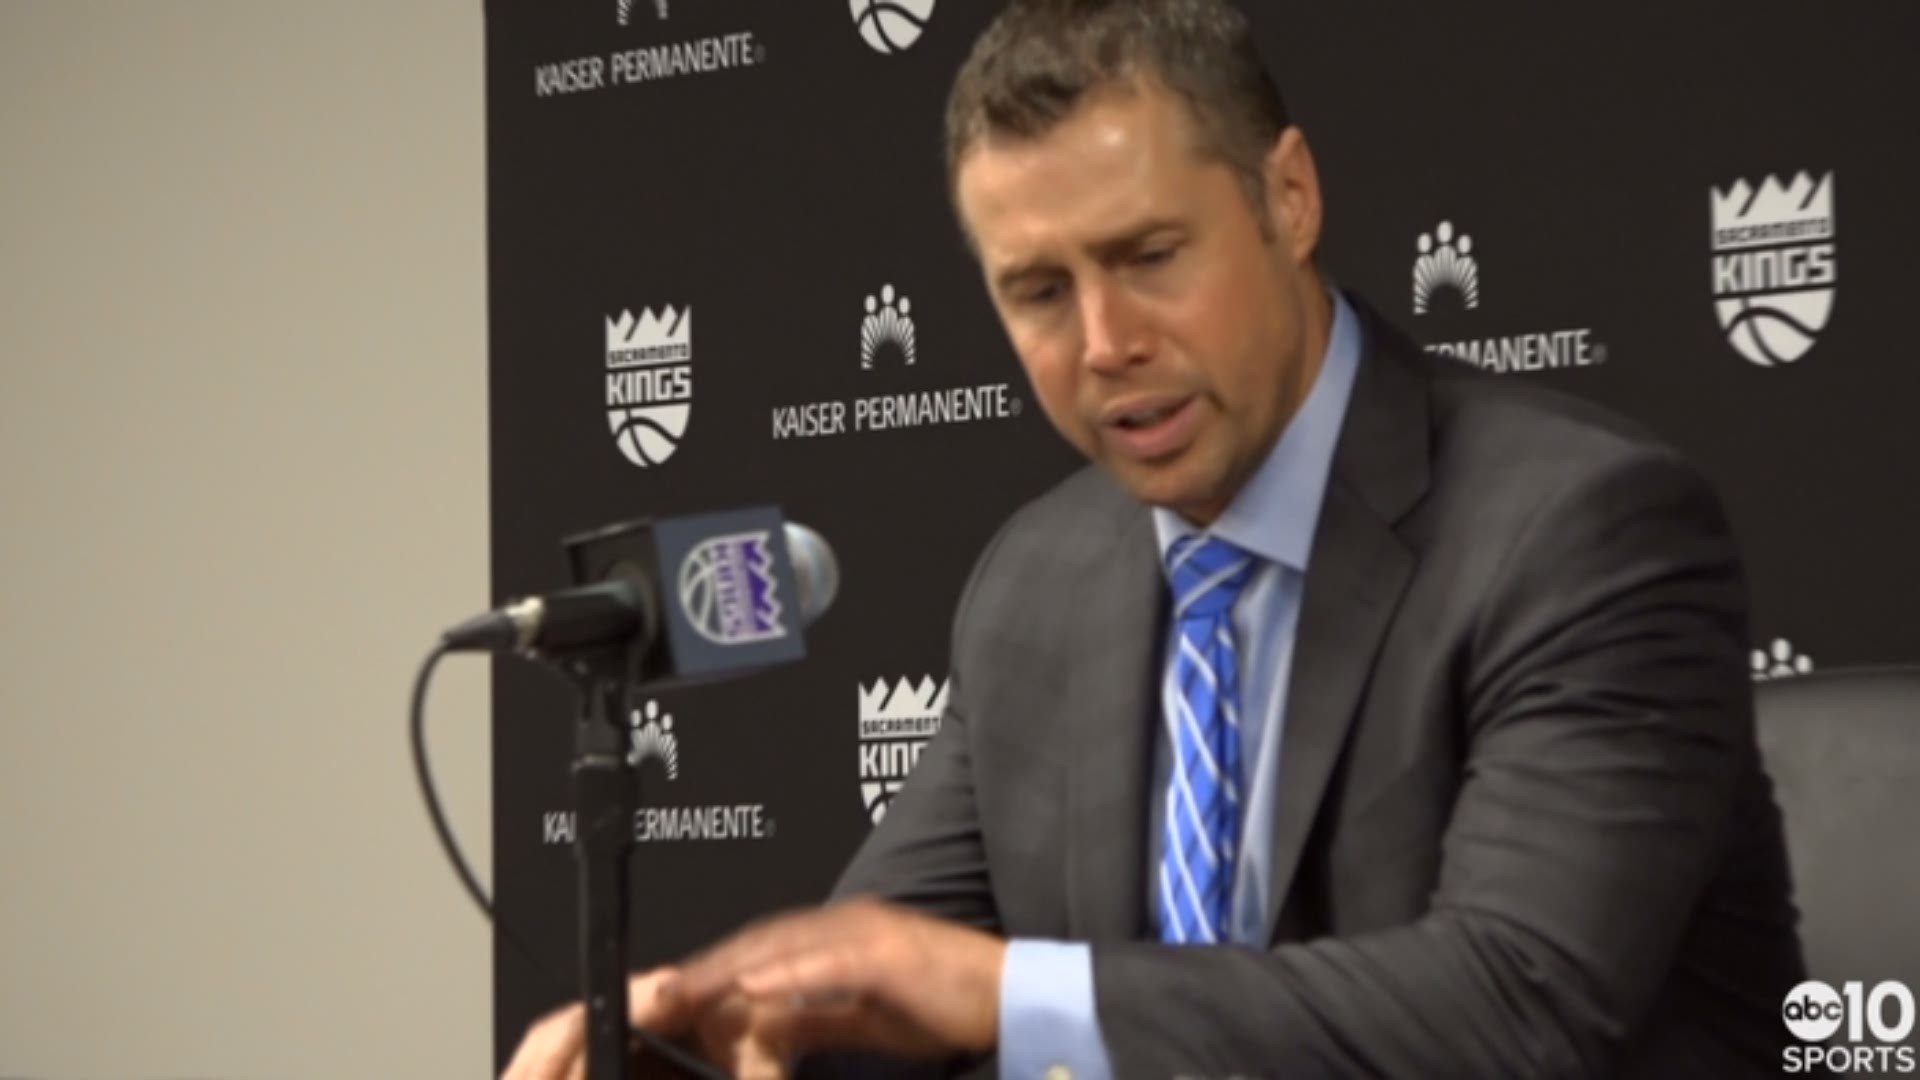 Kings head coach Dave Joerger talks about the job Willie Cauley-Stein, Harry Giles and Marvin Bagley III did against Joel Embiid following Saturday's 115-108 win over the Philadelphia 76ers in Sacramento.